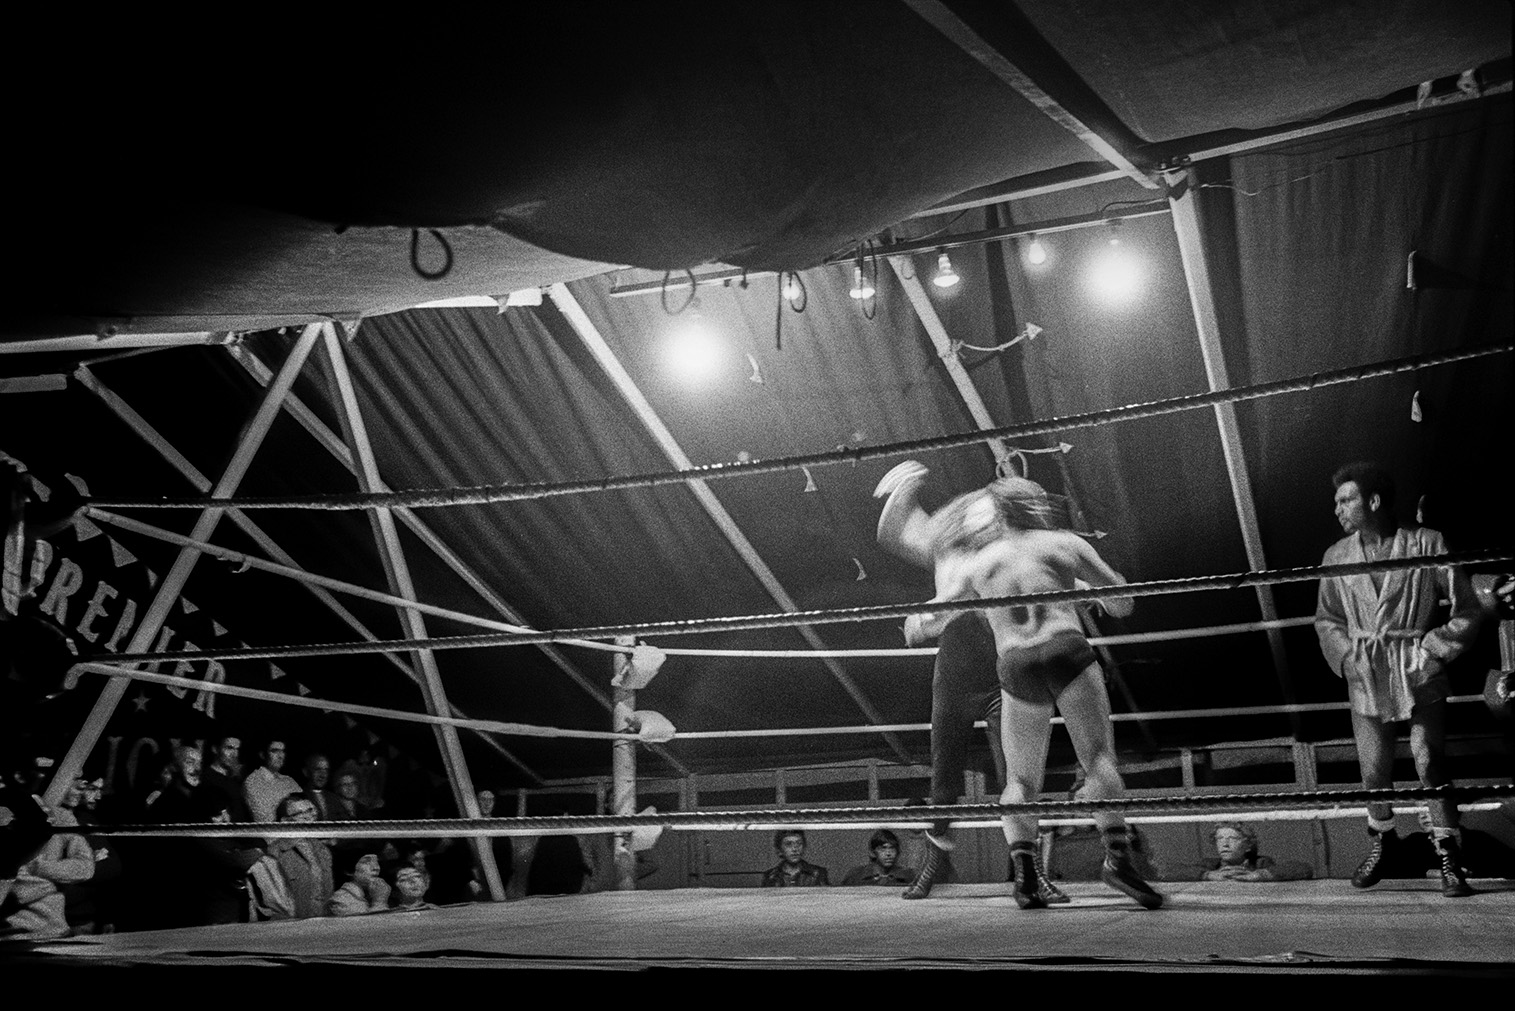 A wrestling match in a tent at Barnstaple Fair. Spectators are watching around the ring and another man is waiting to fight.